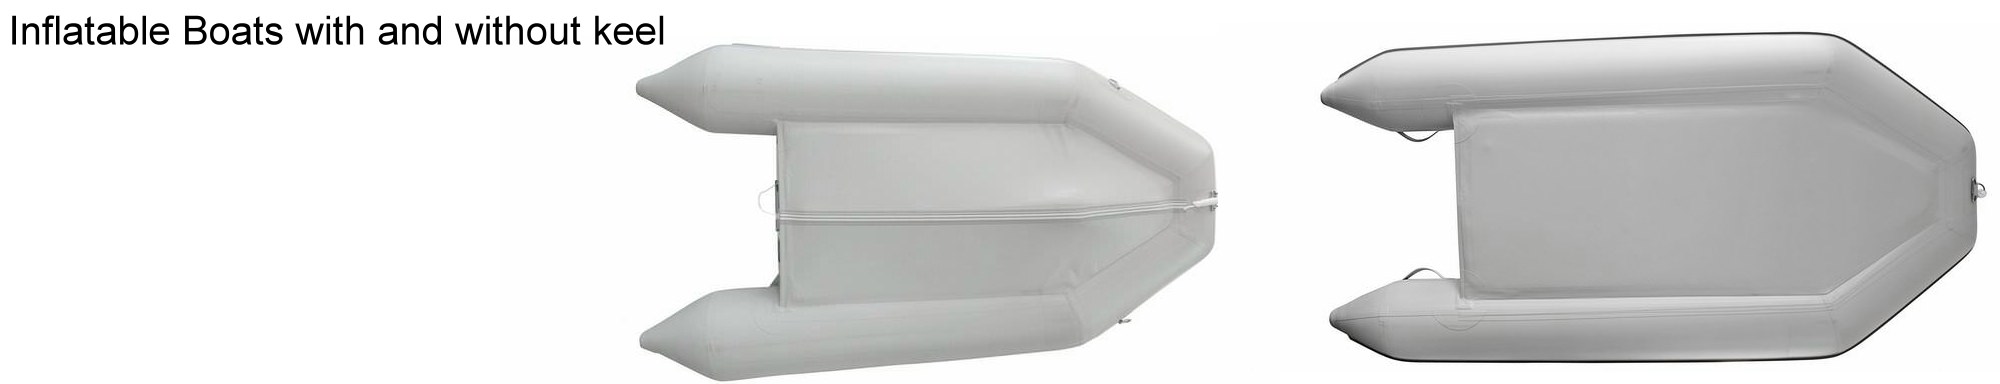 Inflatable boats with and without keel